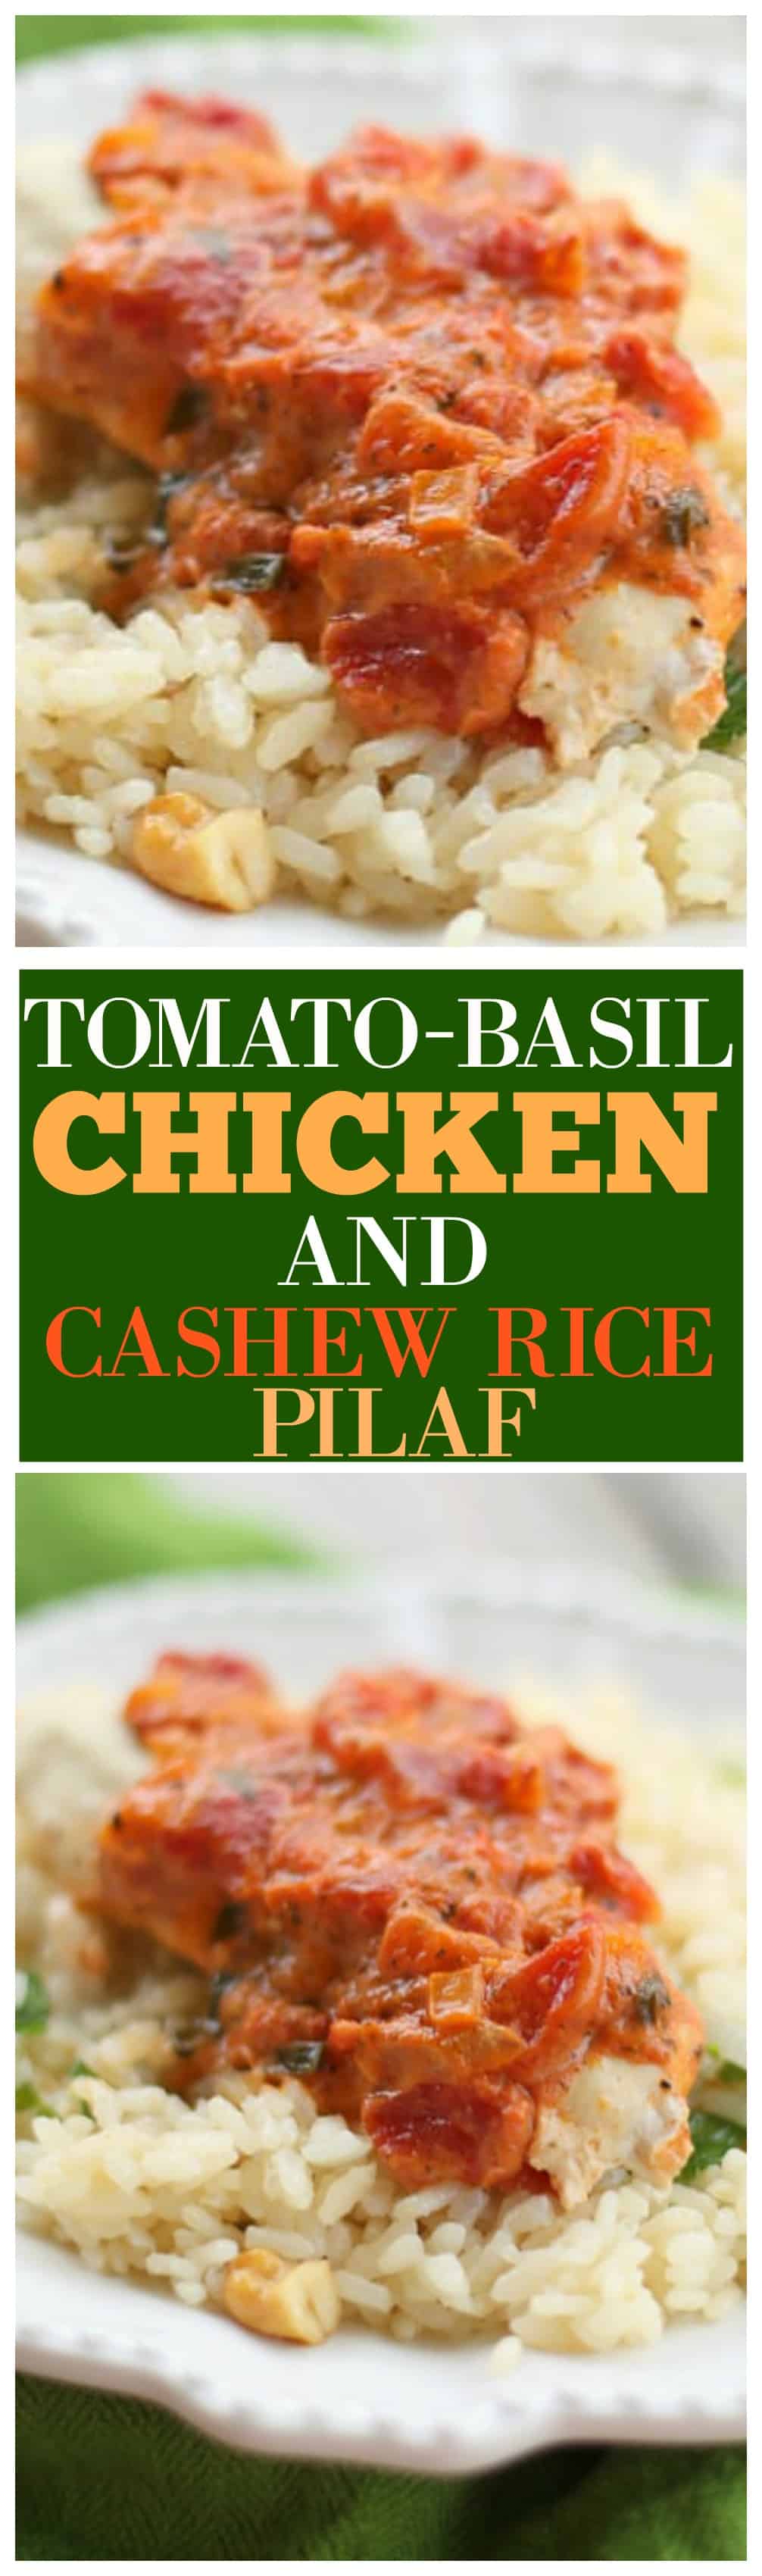 Tomato-Basil Chicken and Cashew Rice Pilaf 